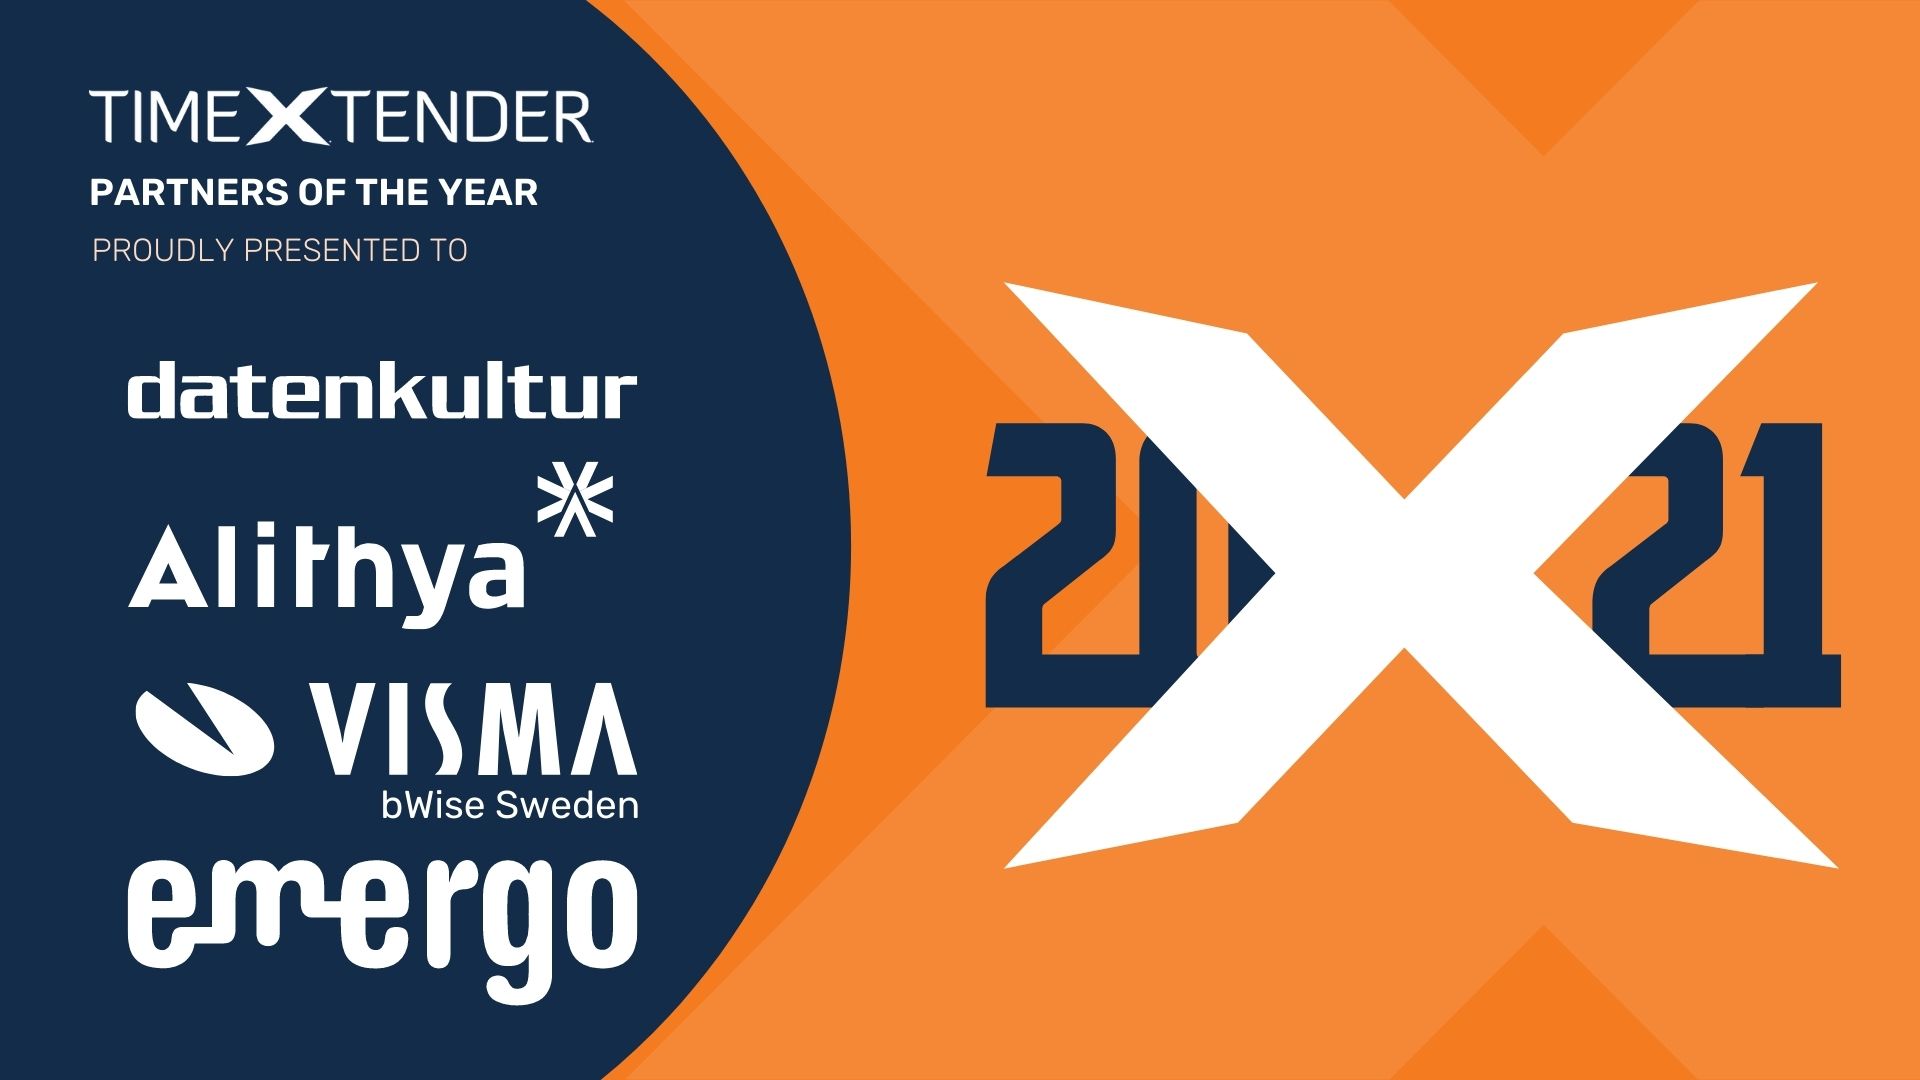 TimeXtender Partner of the year 2021